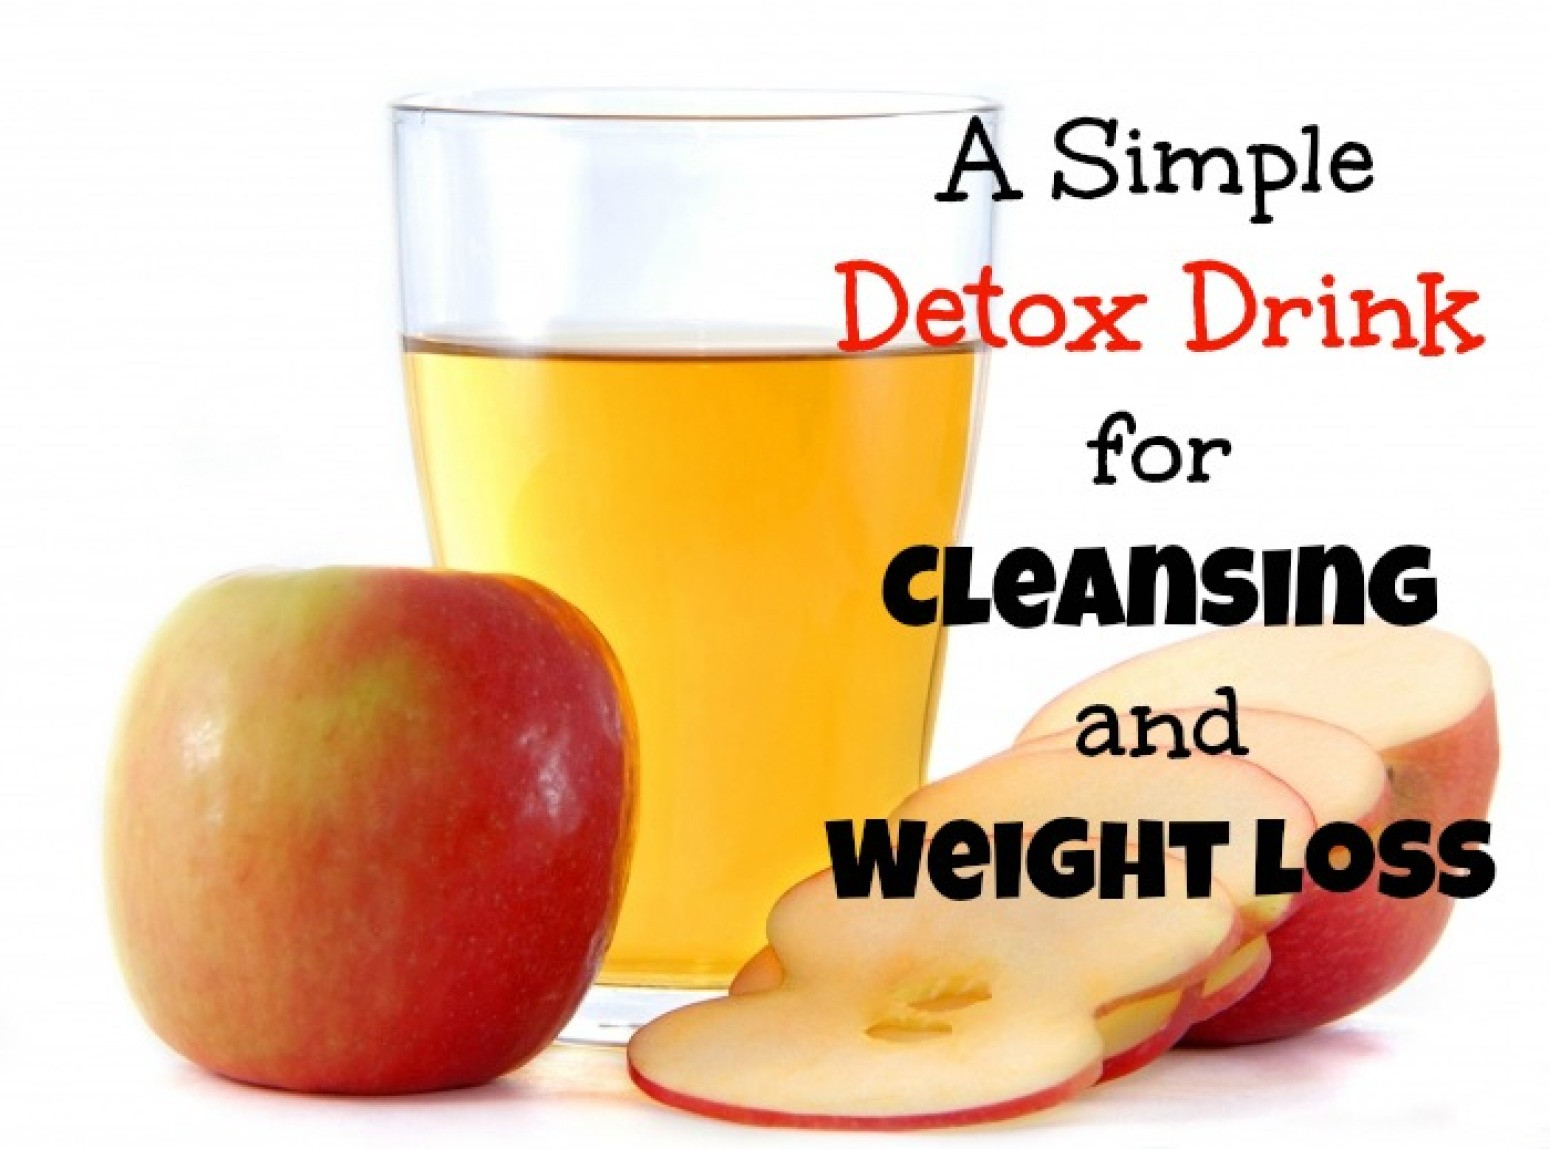 Detox Drinks Recipes For Weight Loss
 Detox Drink for Cleansing and Weight Loss Recipe